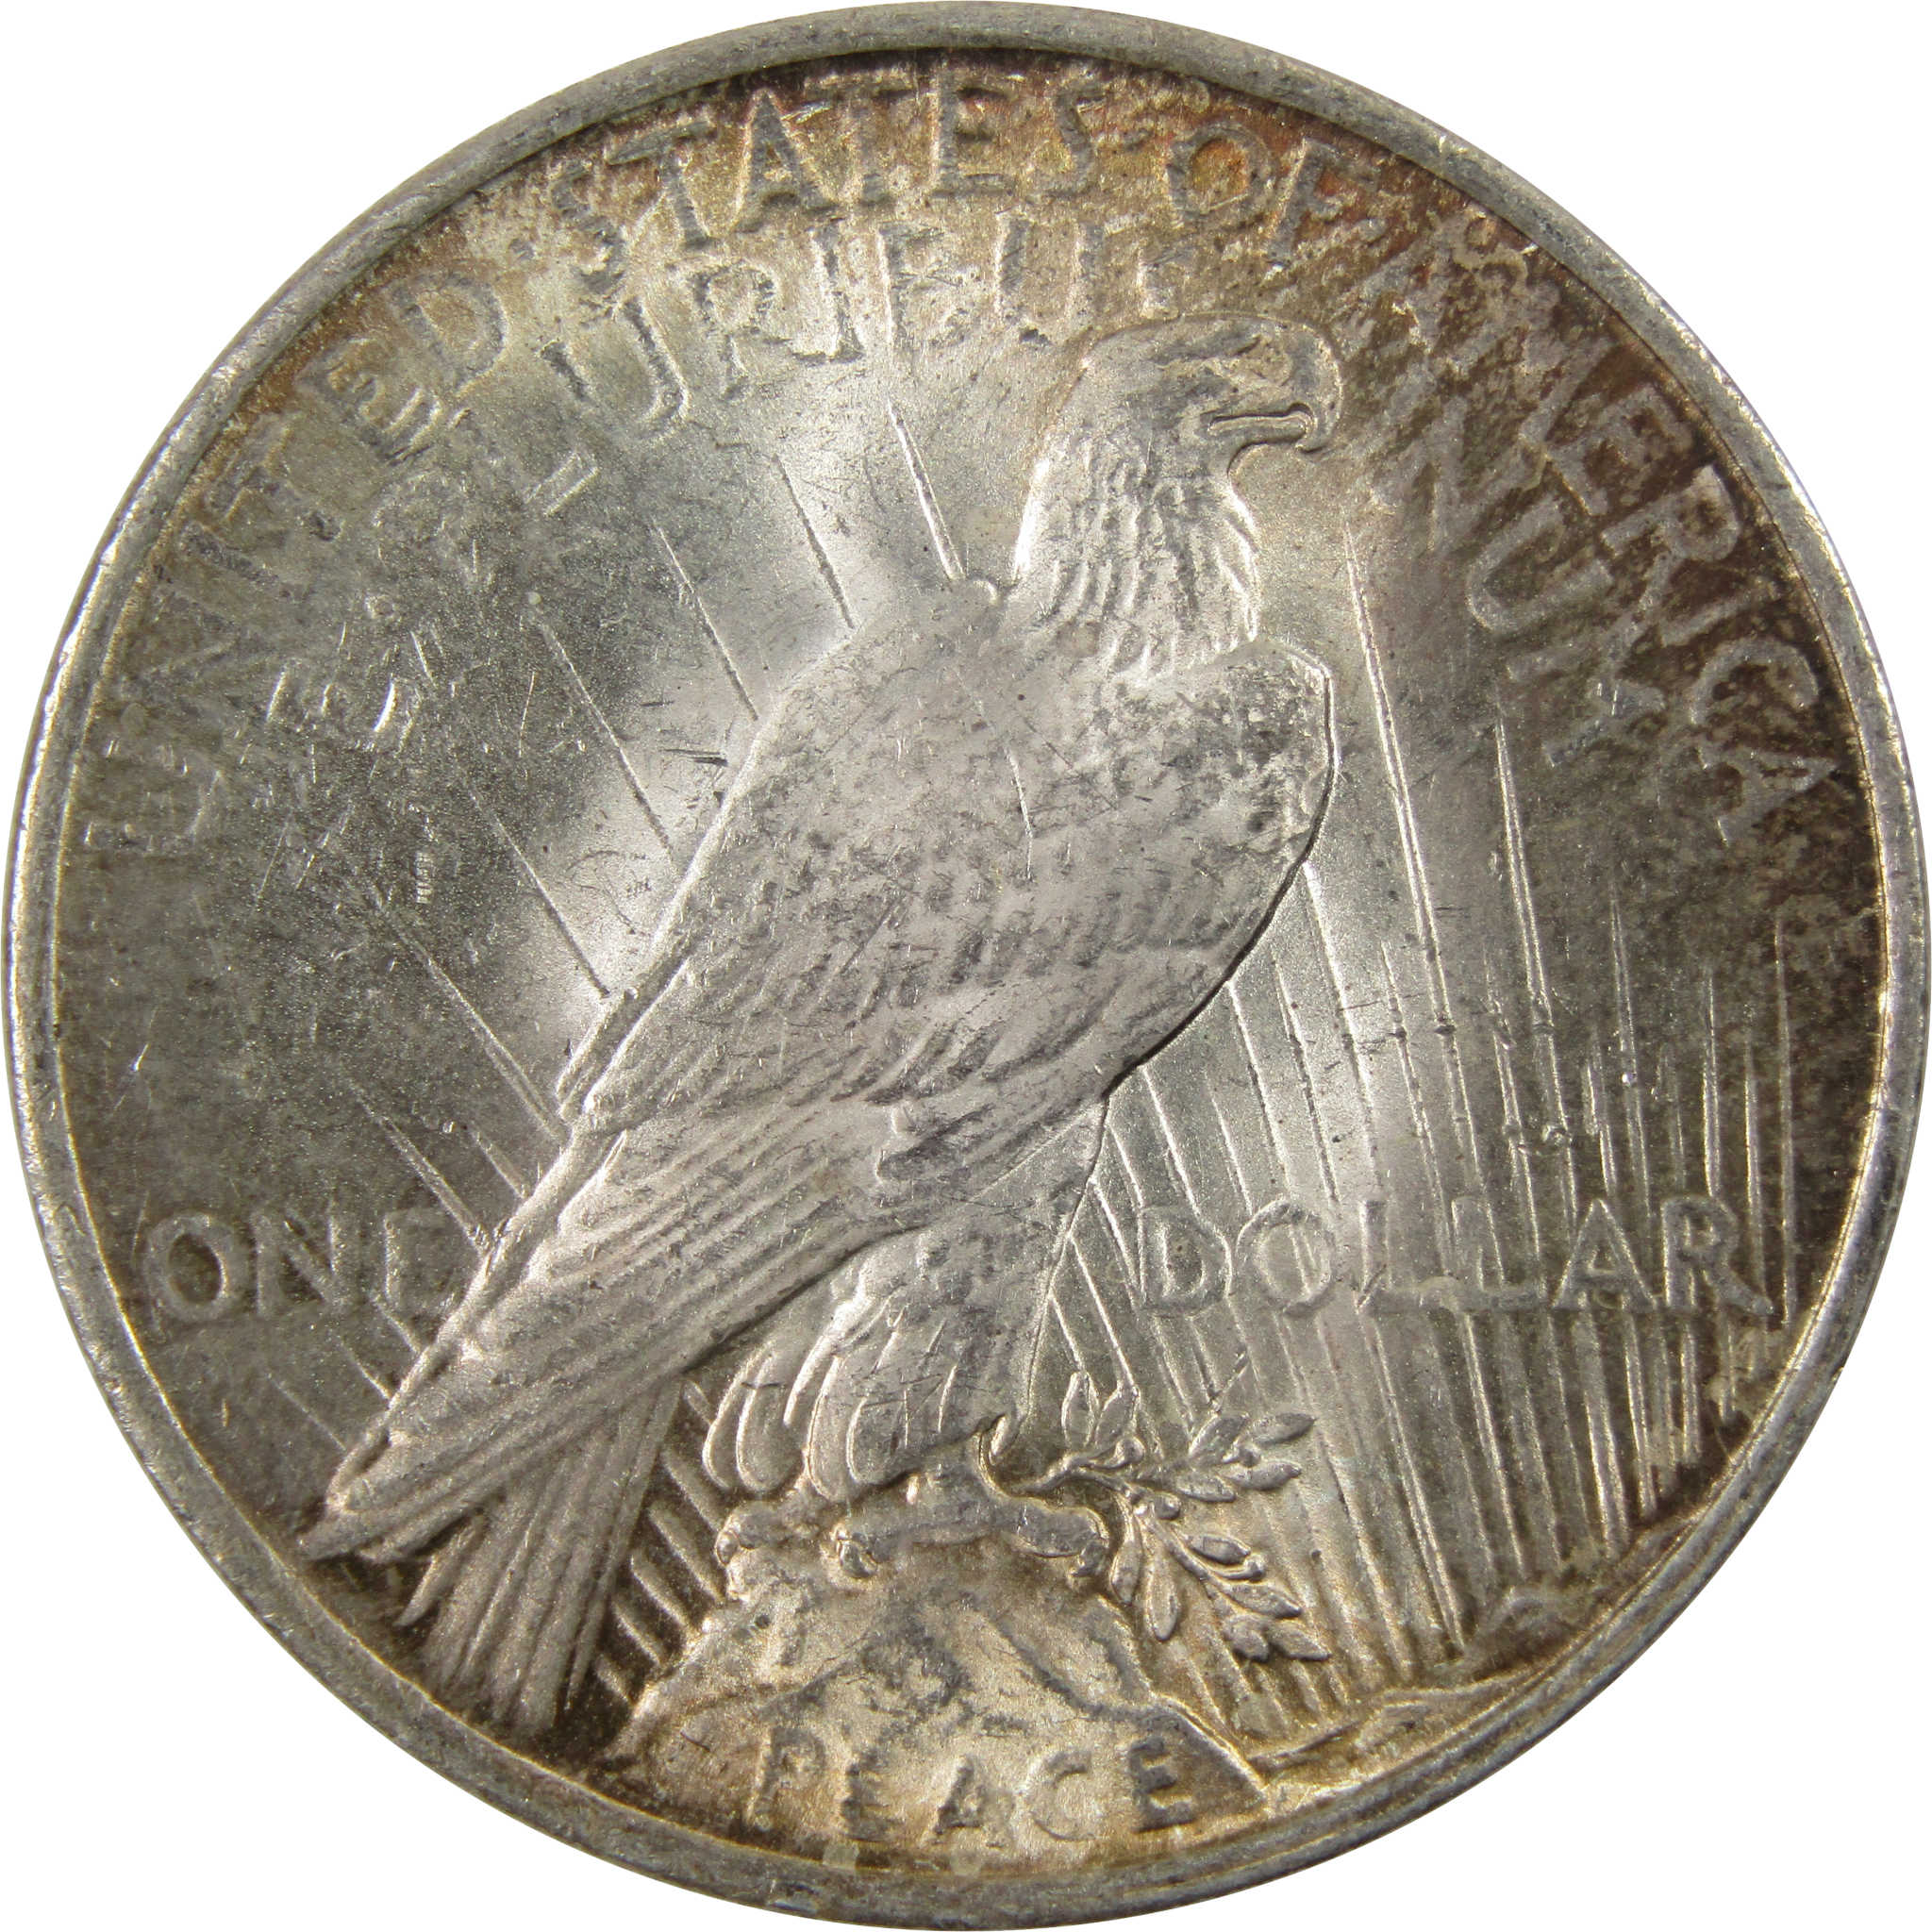 1923 Peace Dollar AU About Uncirculated 90% Silver $1 Coin SKU:I9868